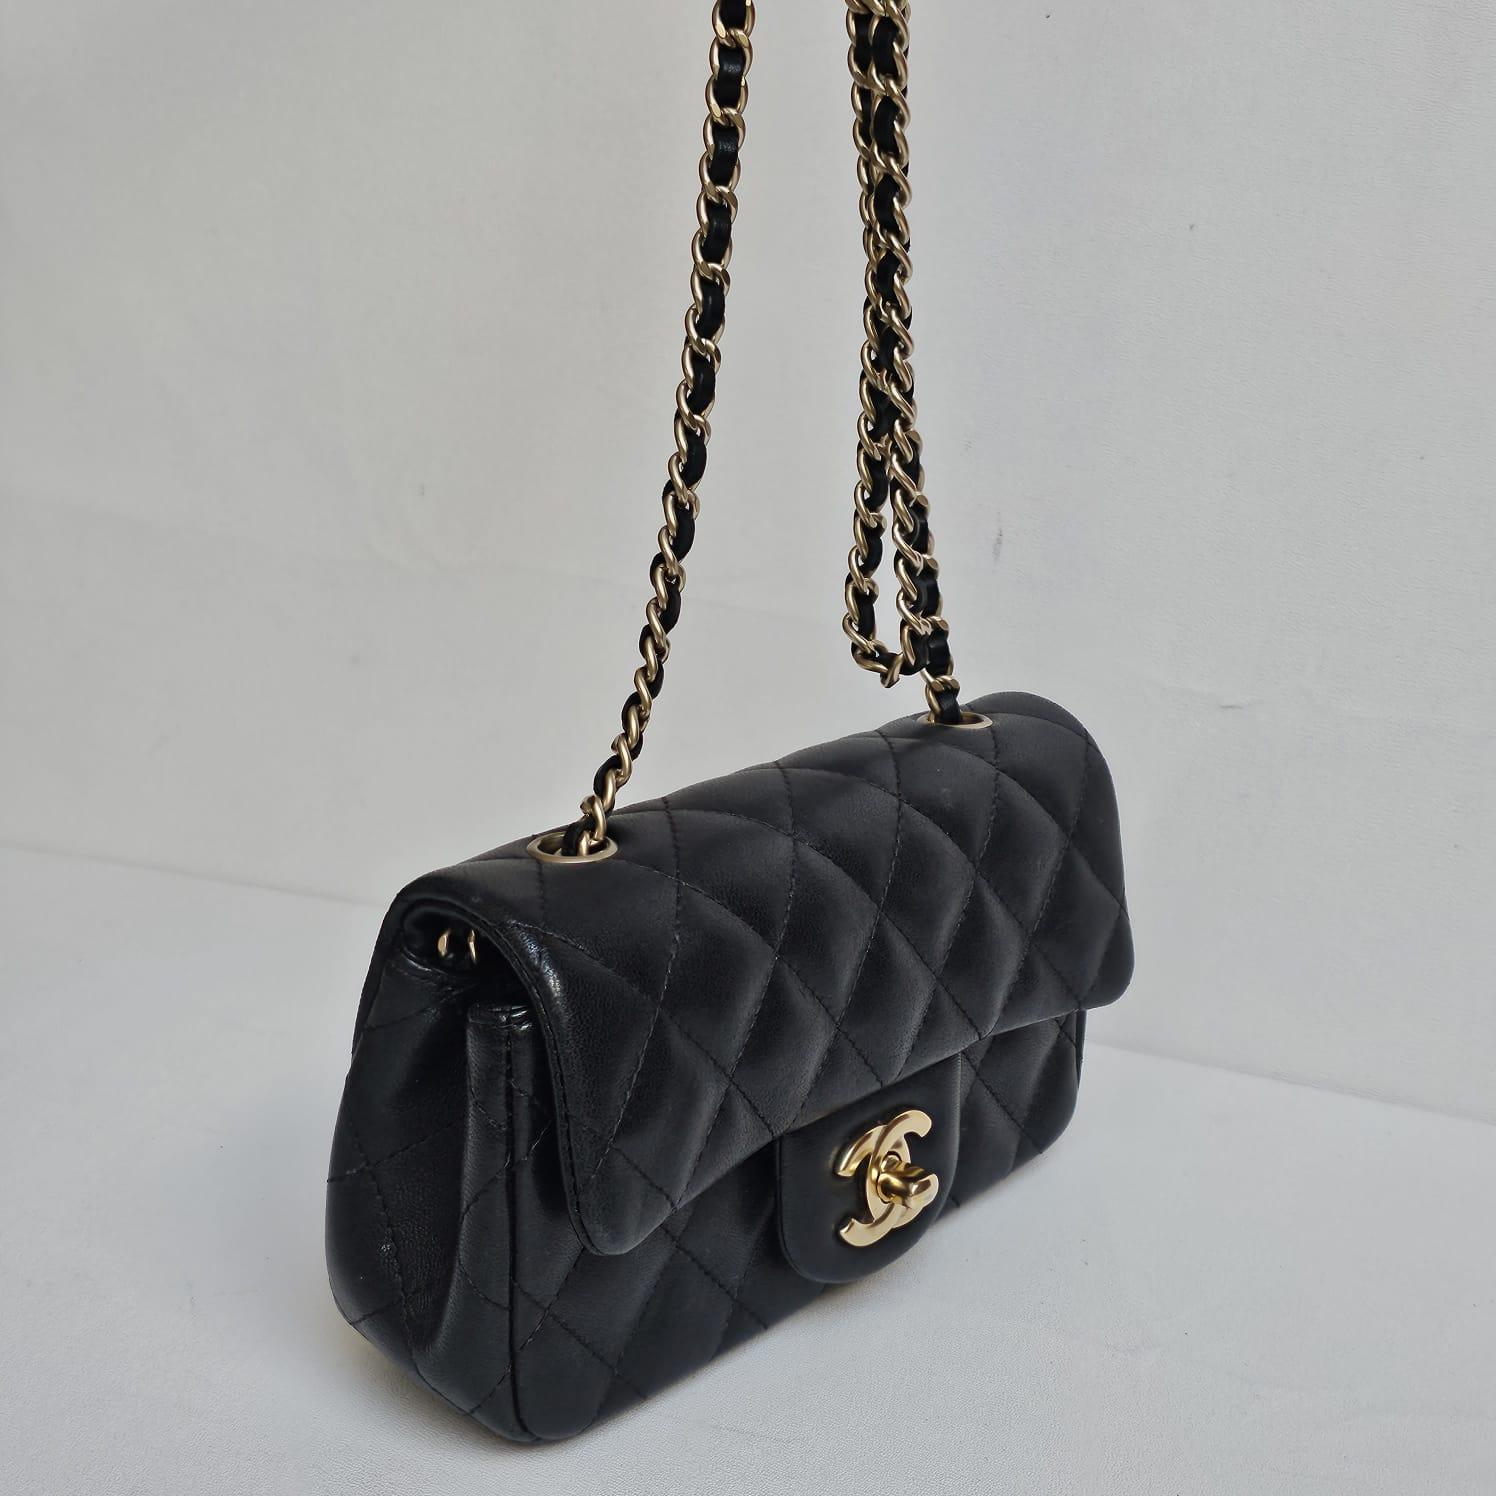 Chanel Black Lambskin Quilted Extra Mini Flap Bag For Sale 2